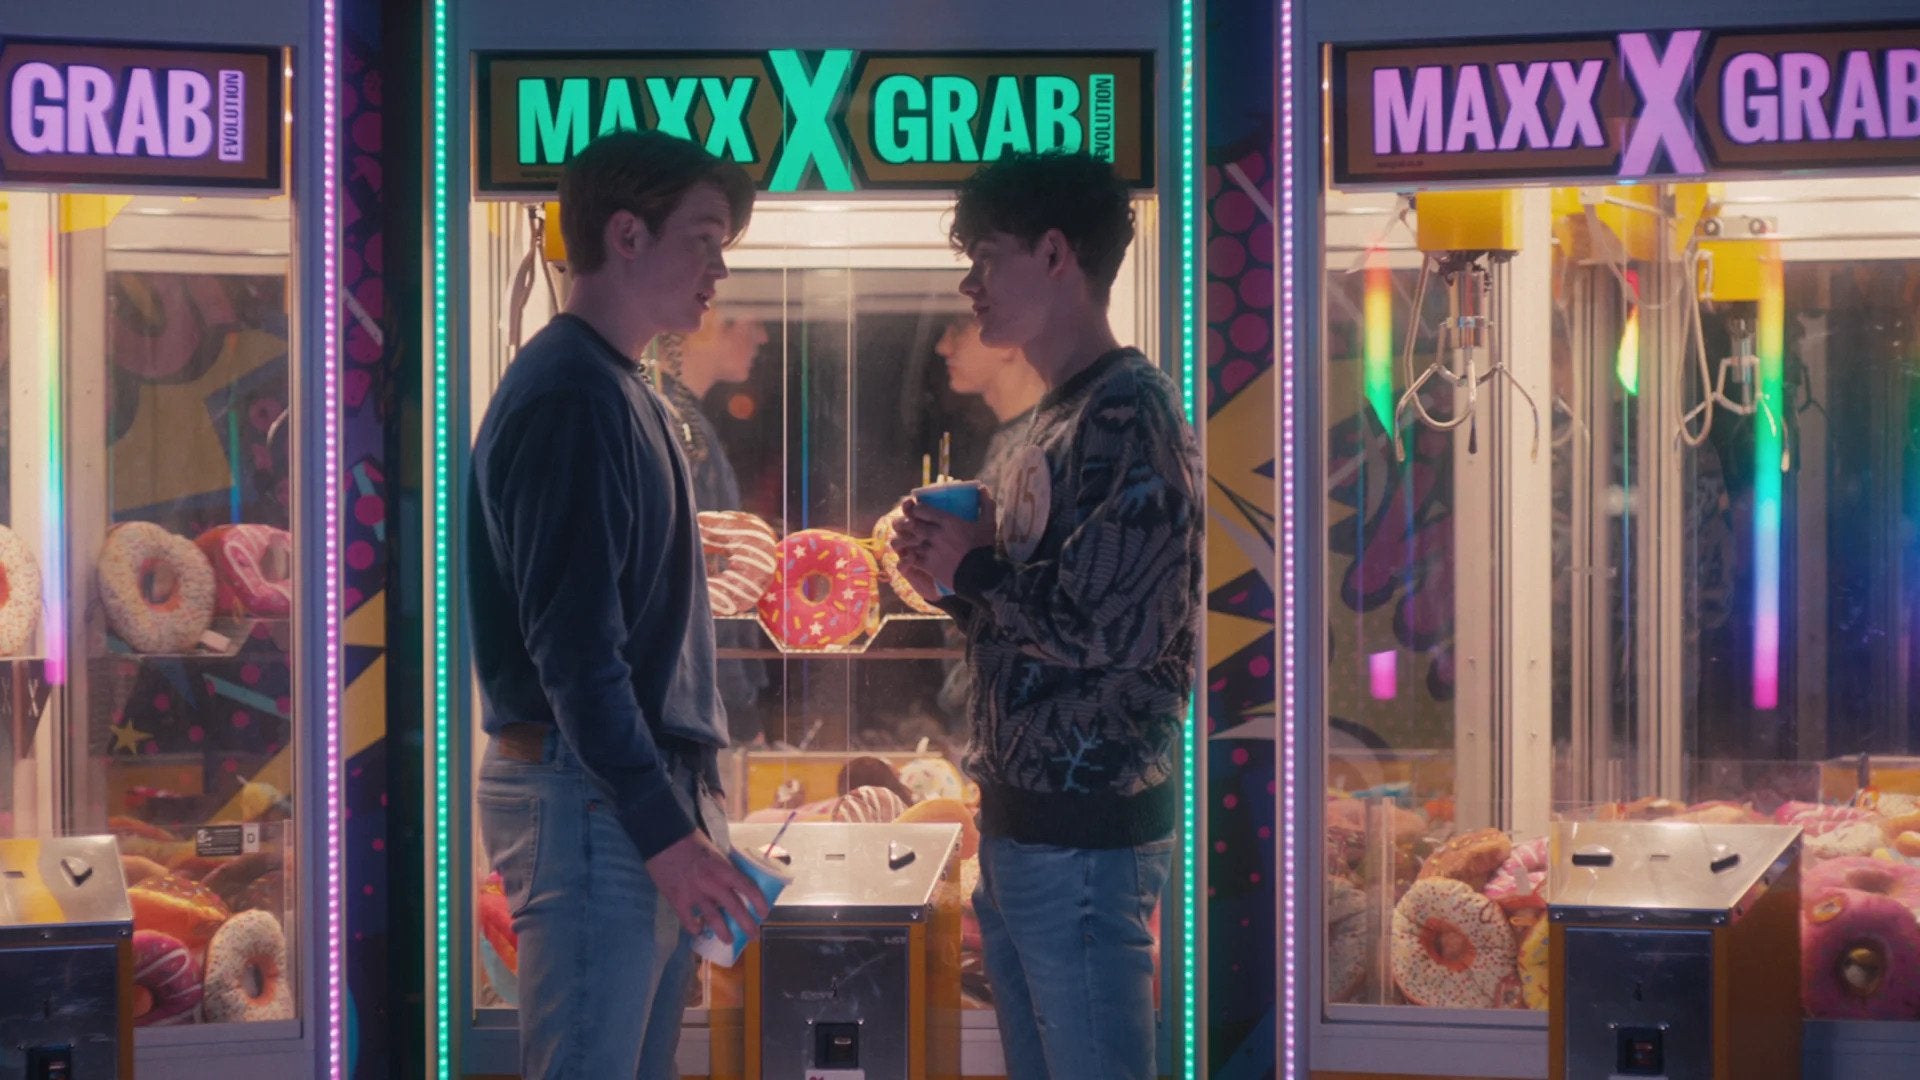 Charlie and Nick standing in front of claw machines in arcade